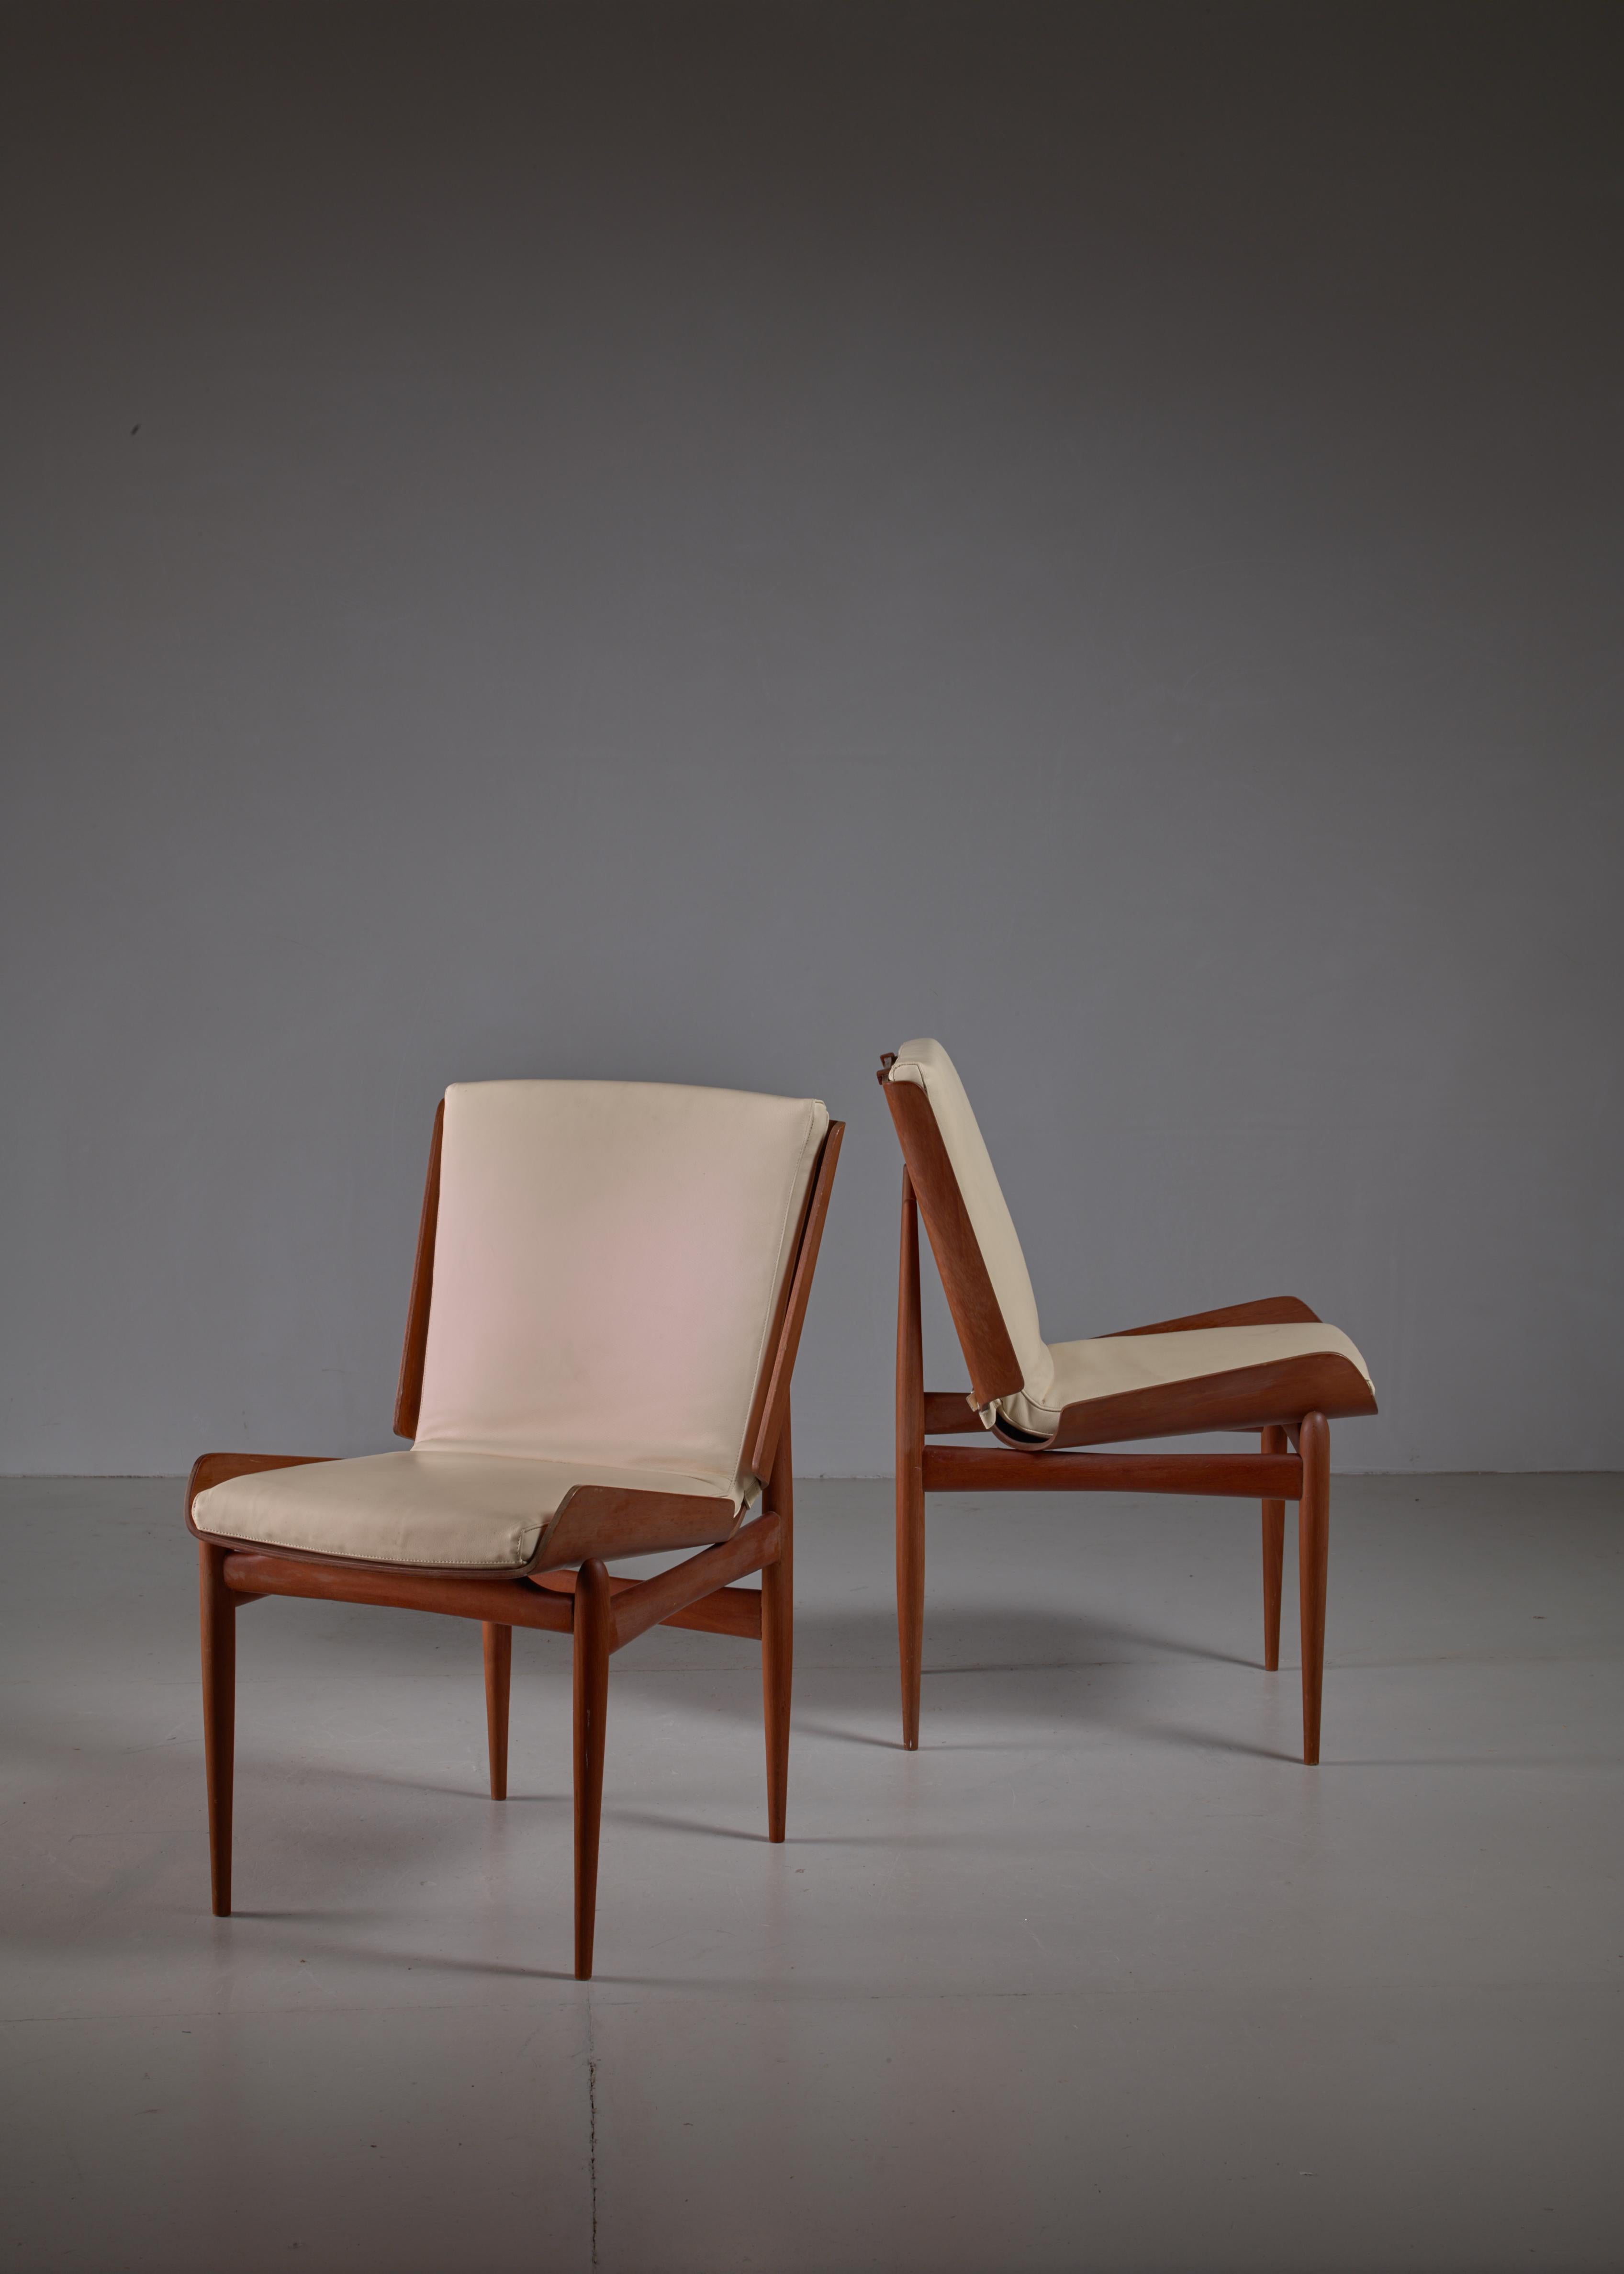 A beautiful pair of side chairs. The seat is made of folded plywood with
a white leather seat pad that is attached to the seat with a beautiful wooden clasp at the top (see image 6) and a slim white leather belt at the bottom. The plywood seats are